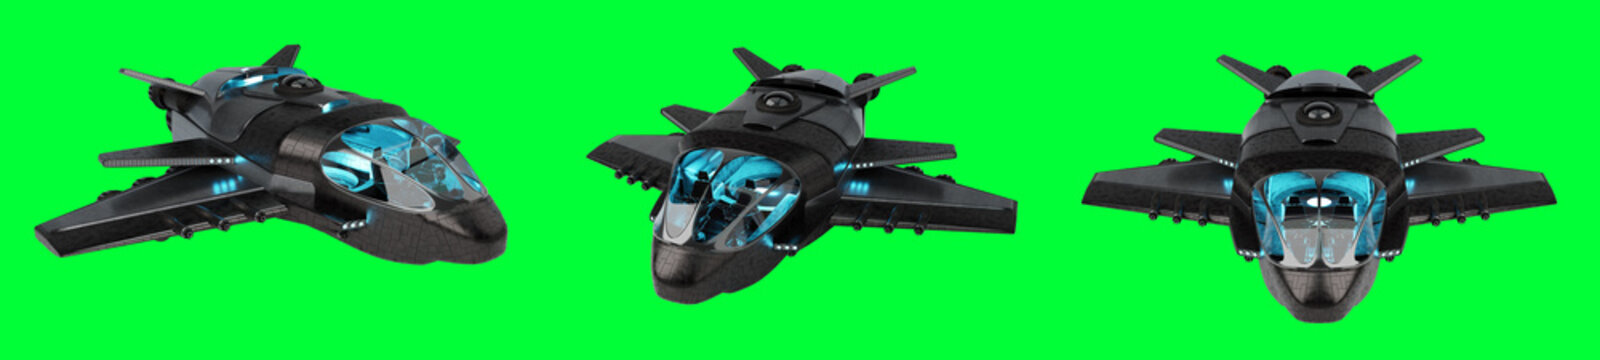 Futuristic spacecraft collection isolated on green background 3D rendering